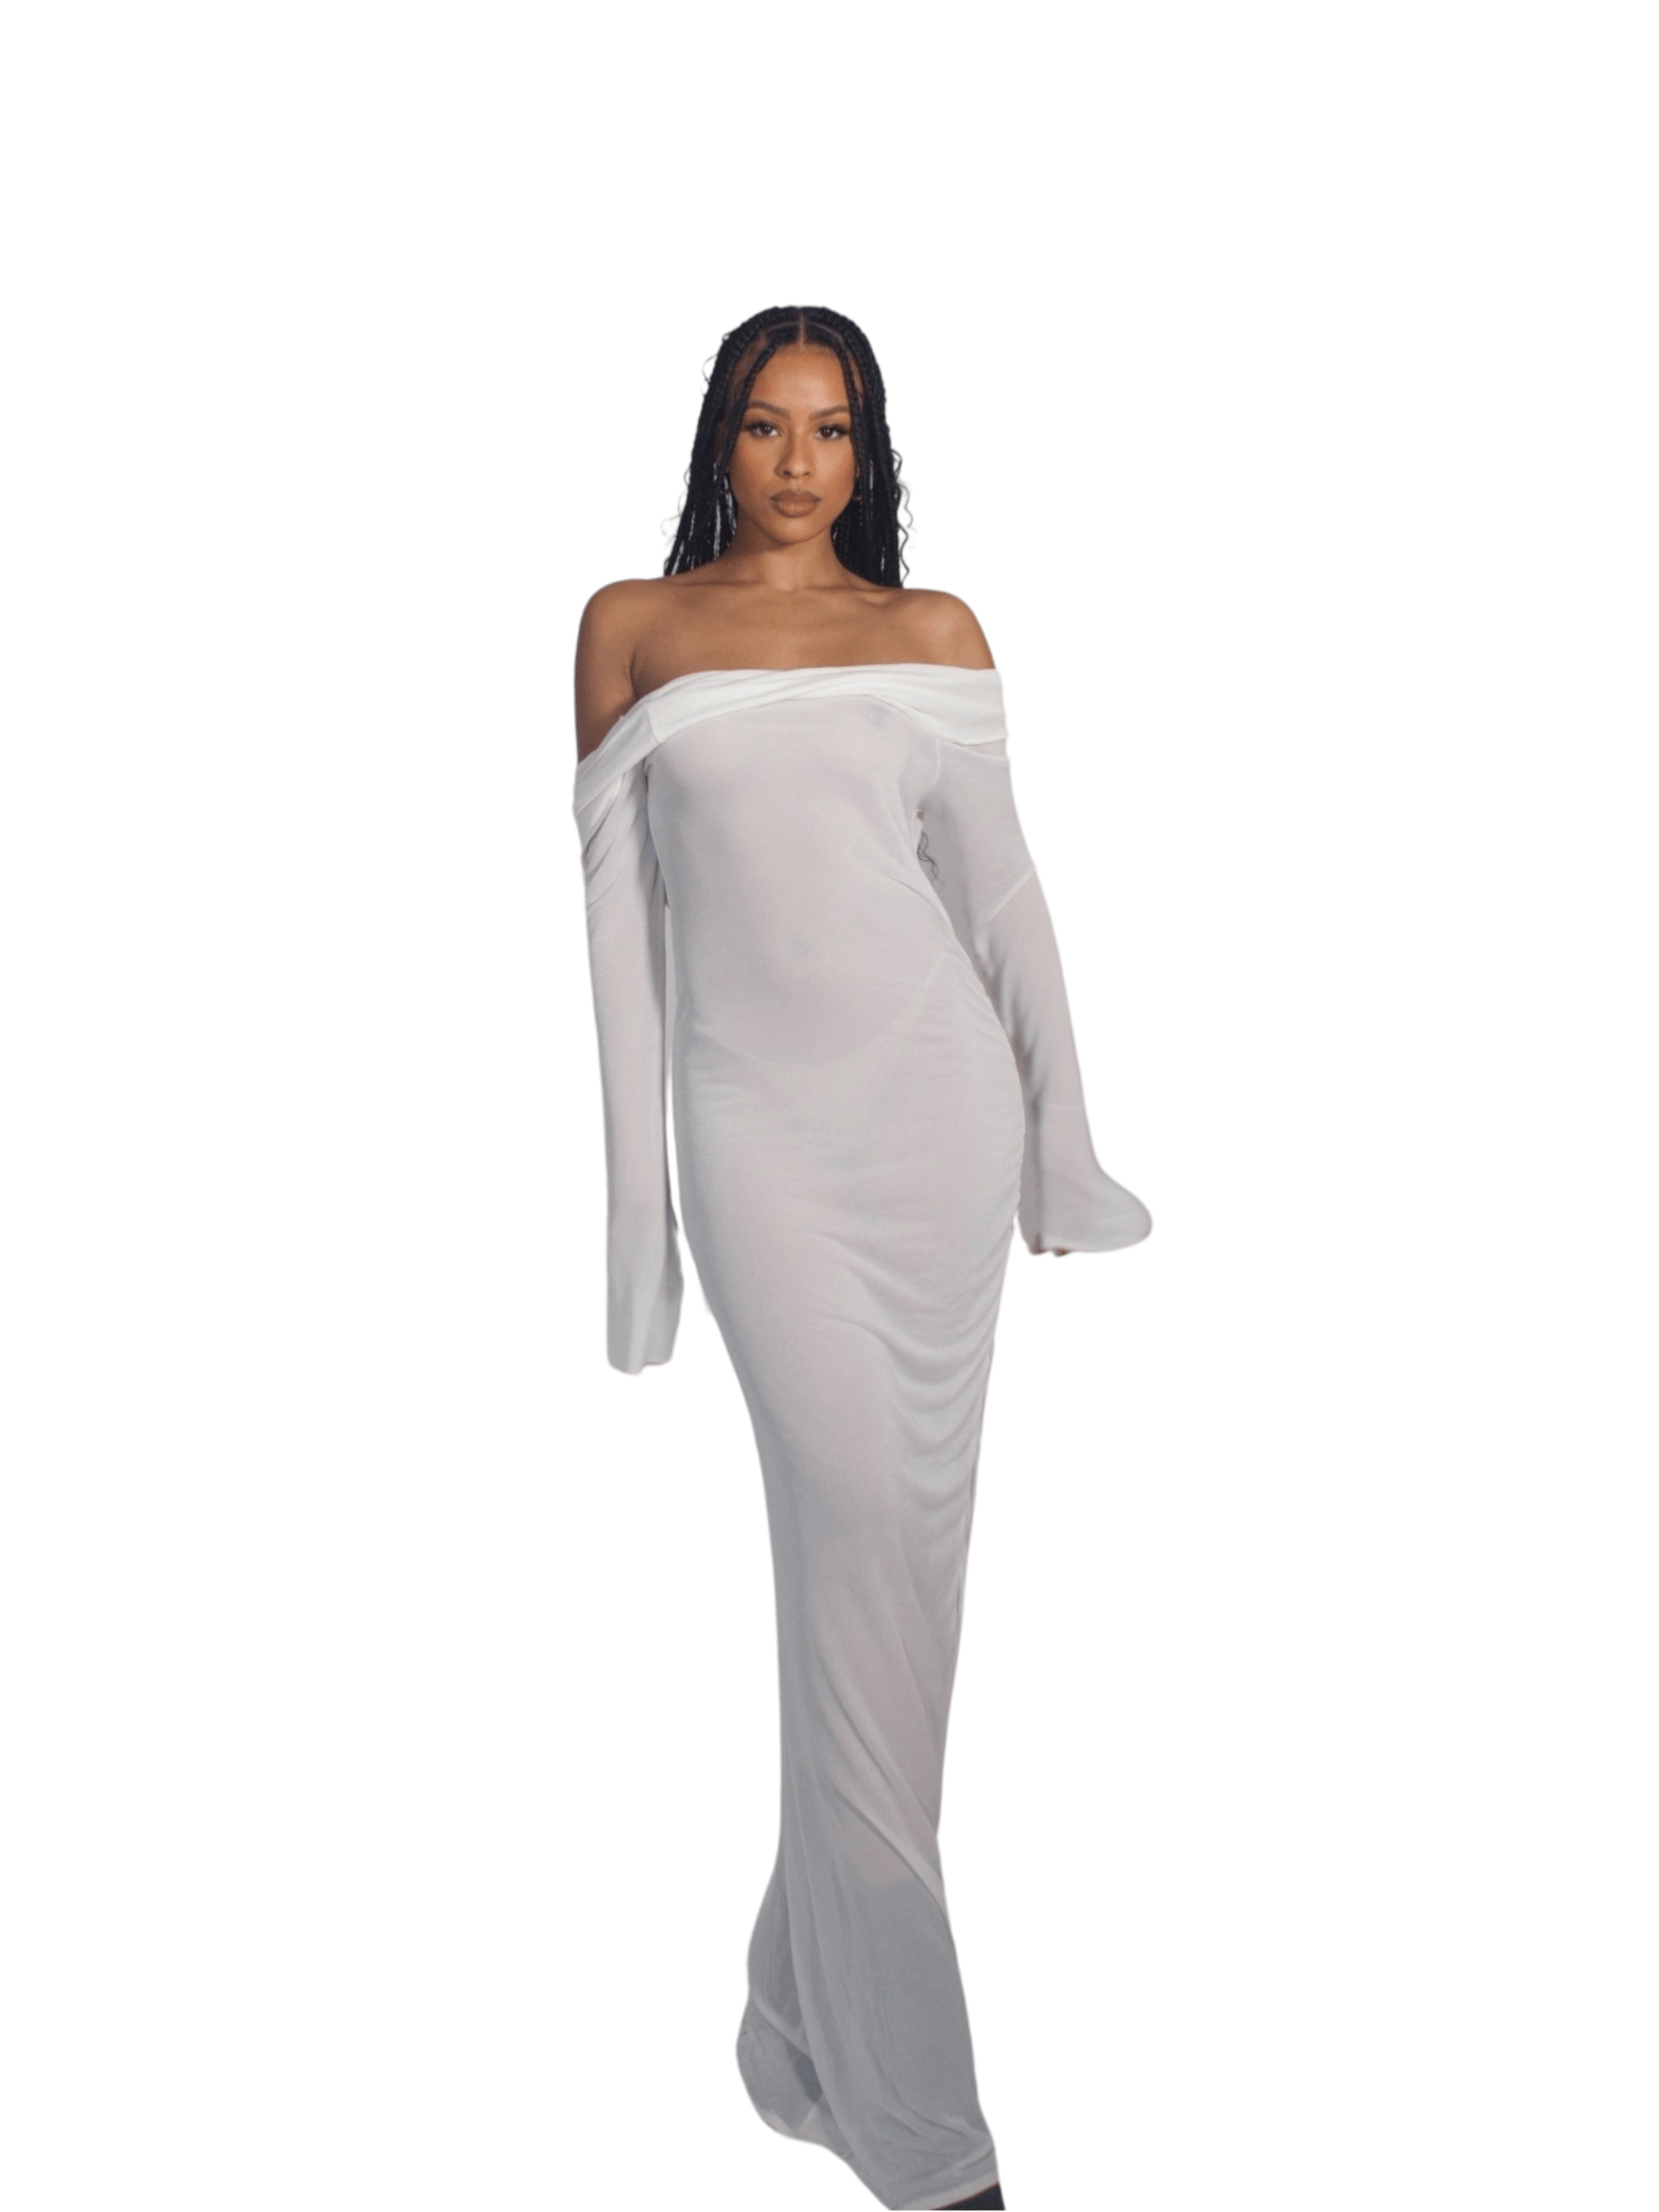 KNITTED OFF-THE-SHOULDER DRESS WITH DRAPE OPEN BACK DETAIL - SIREN THE BRAND